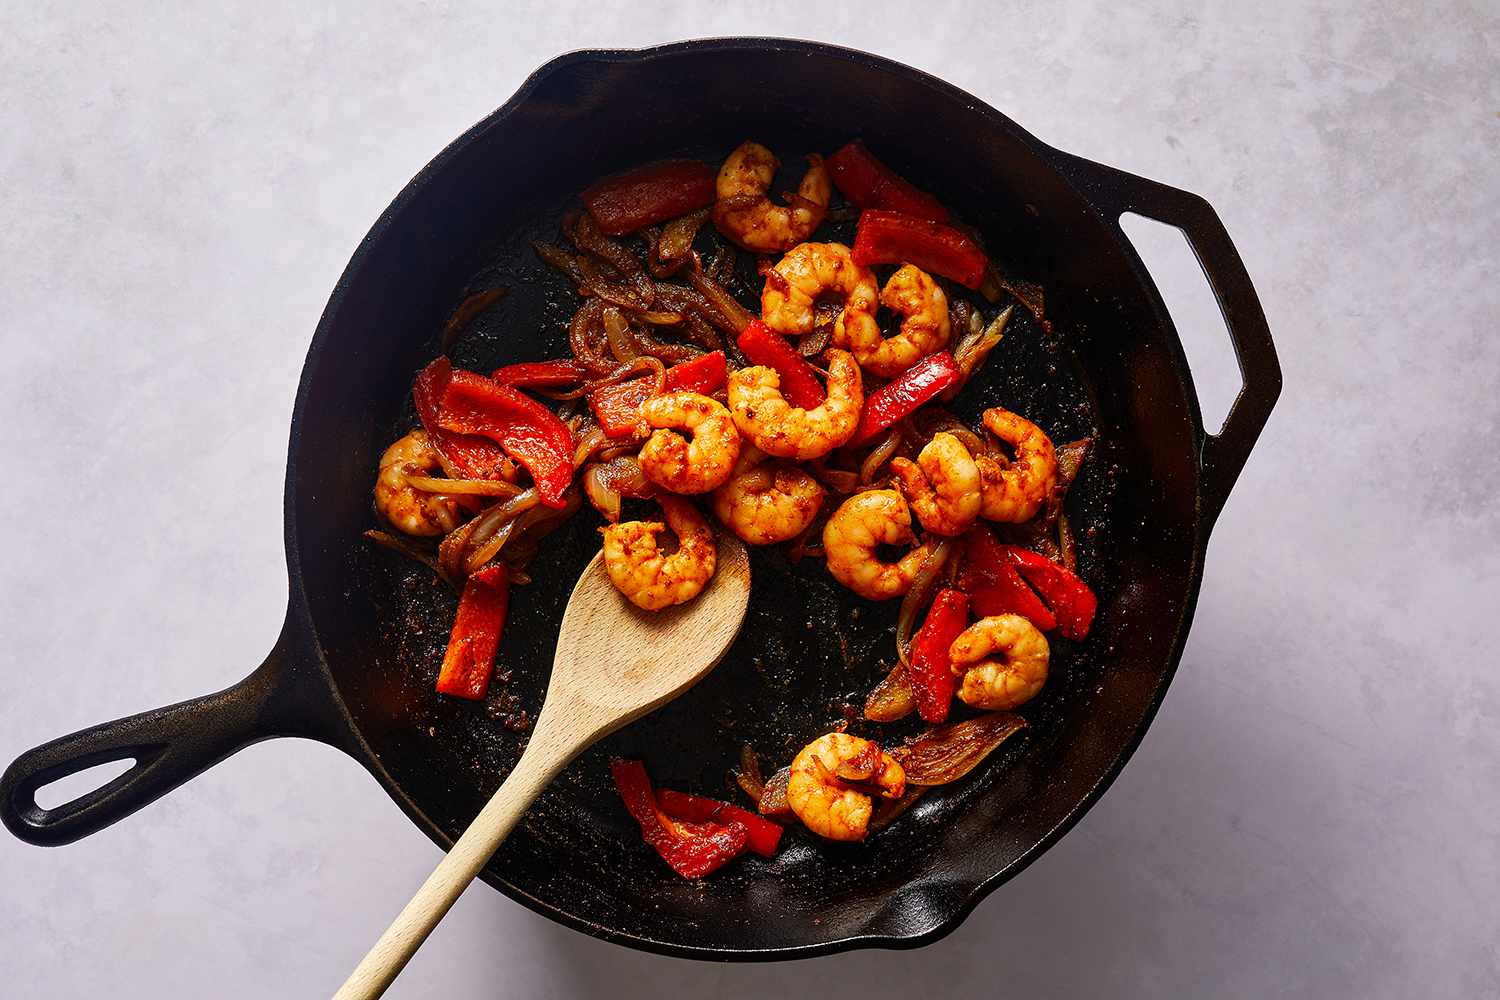 Onions, peppers and shrimp in a skillet 